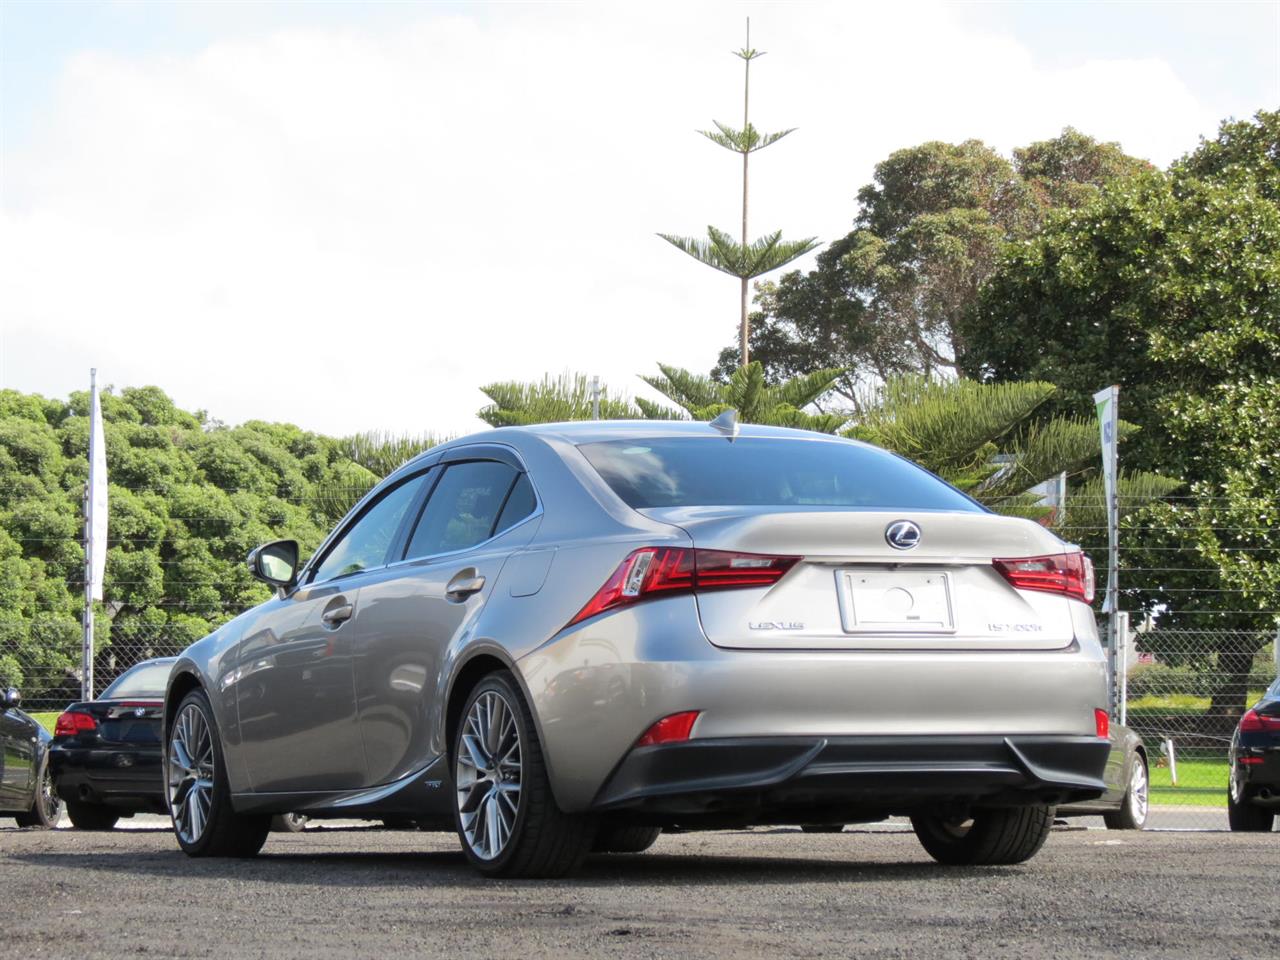 2014 Lexus IS 300h only $105 weekly